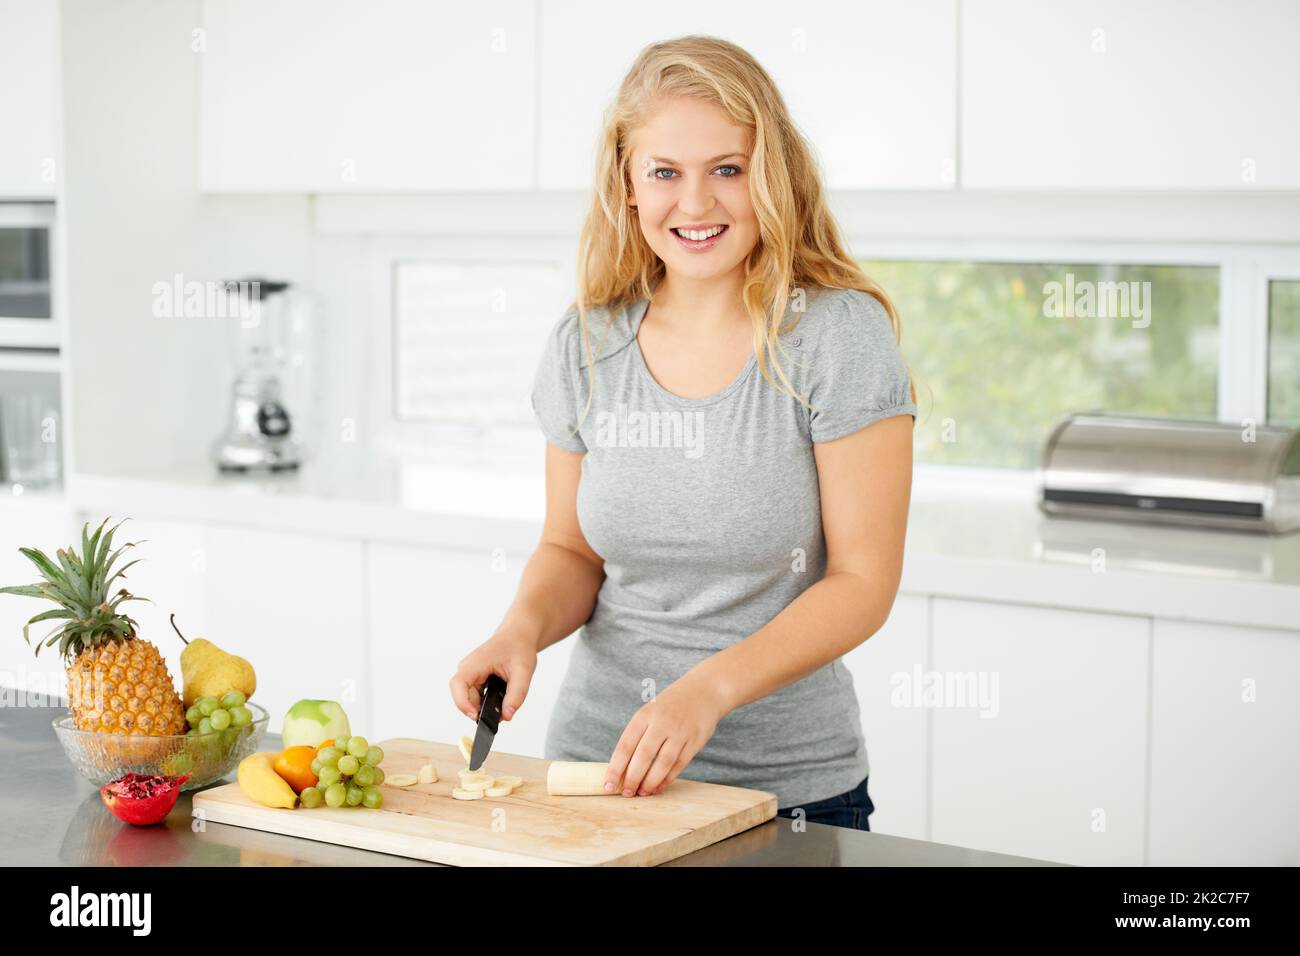 Nothing beats fresh fruit. Attractive curvaceous young woman chopping fruit in her kitchen. Stock Photo